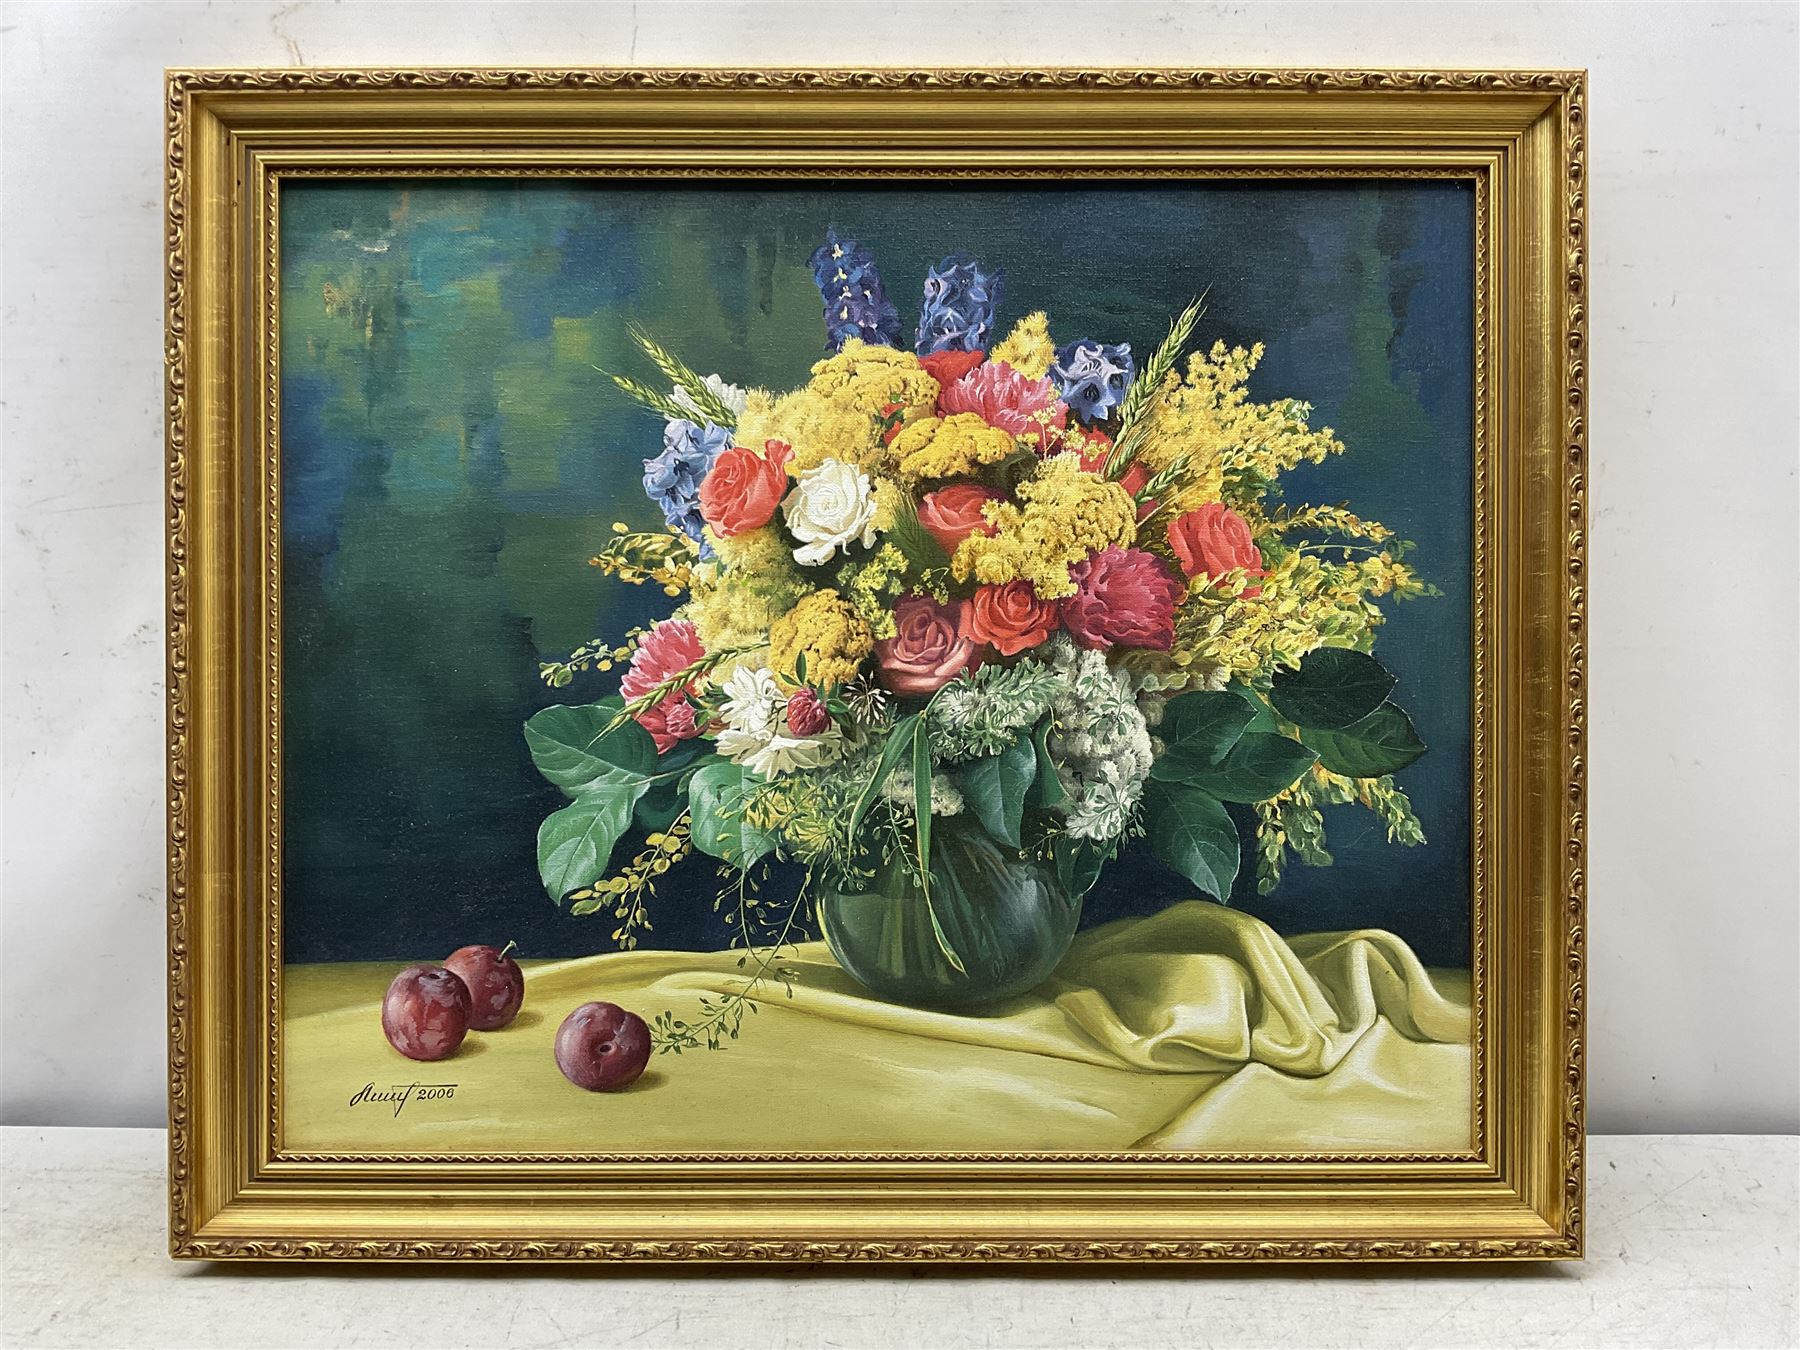 Gregori (Lysechko) Lyssetchko (Russian 1939-): Still Life of Flowers in a Vase with Plums - Image 2 of 4